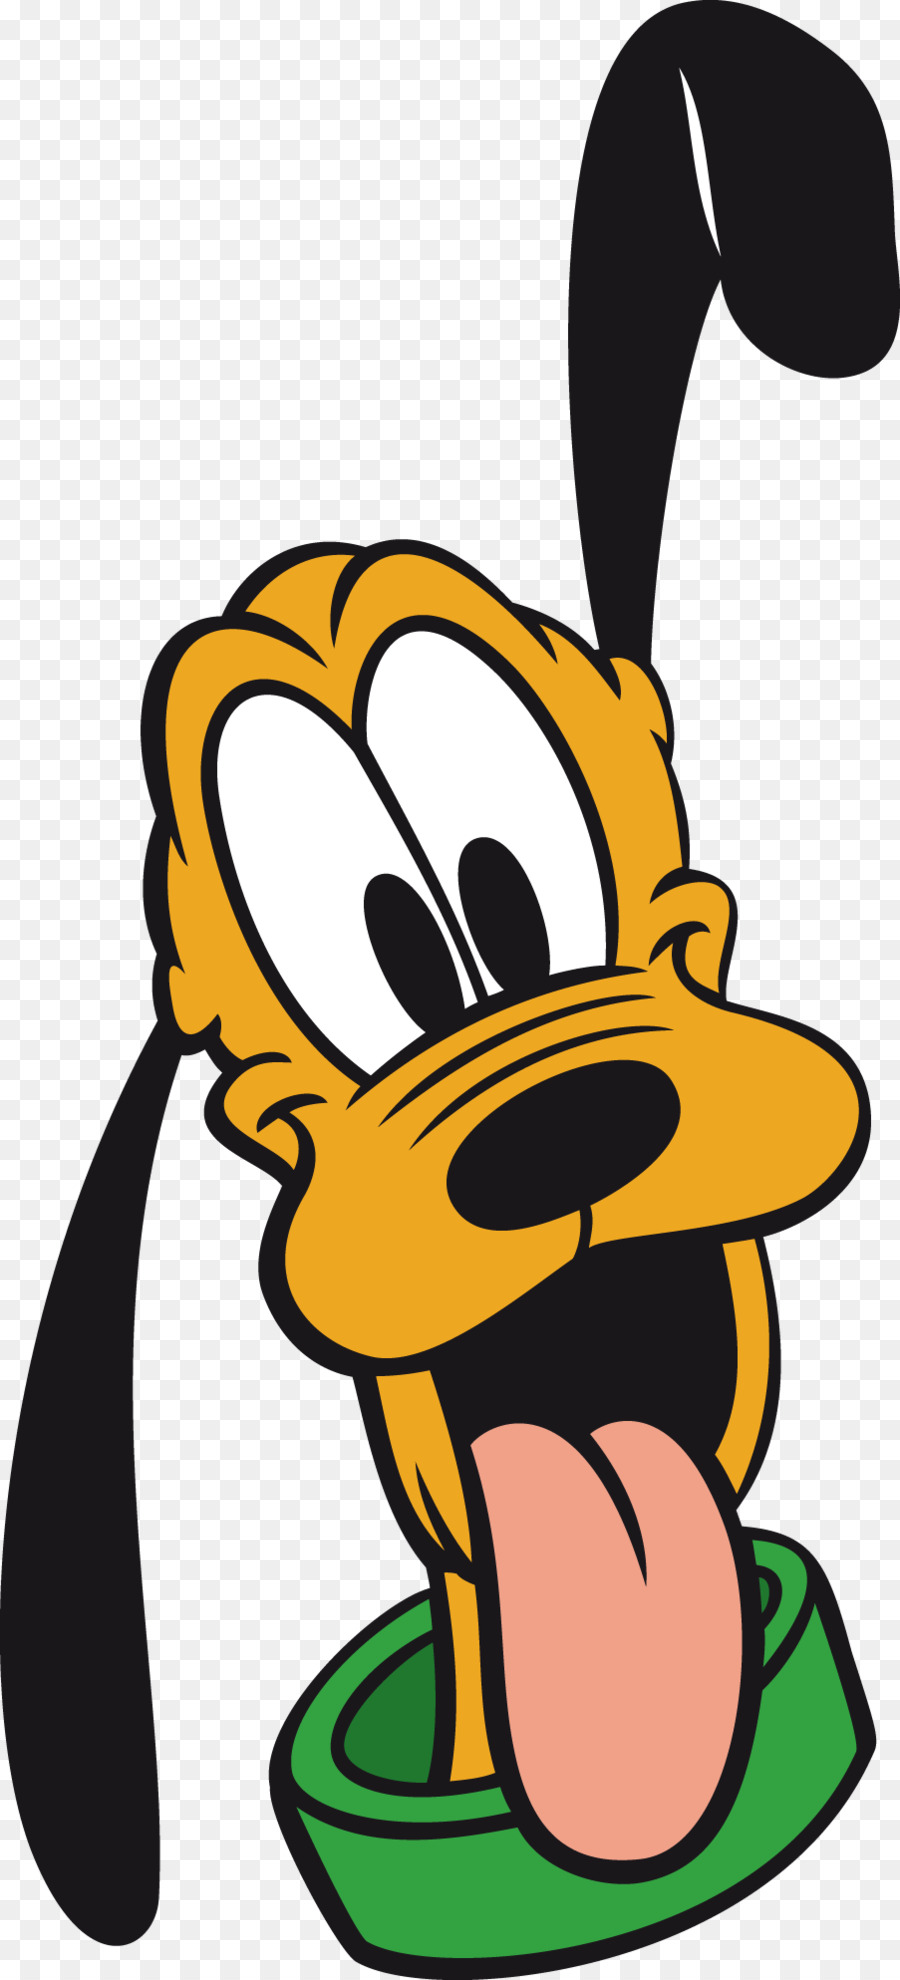 Pluto Mickey Mouse Goofy Minnie Mouse Dog - Pluto Cliparts png download - 900*1980 - Free Transparent Pluto png Download.